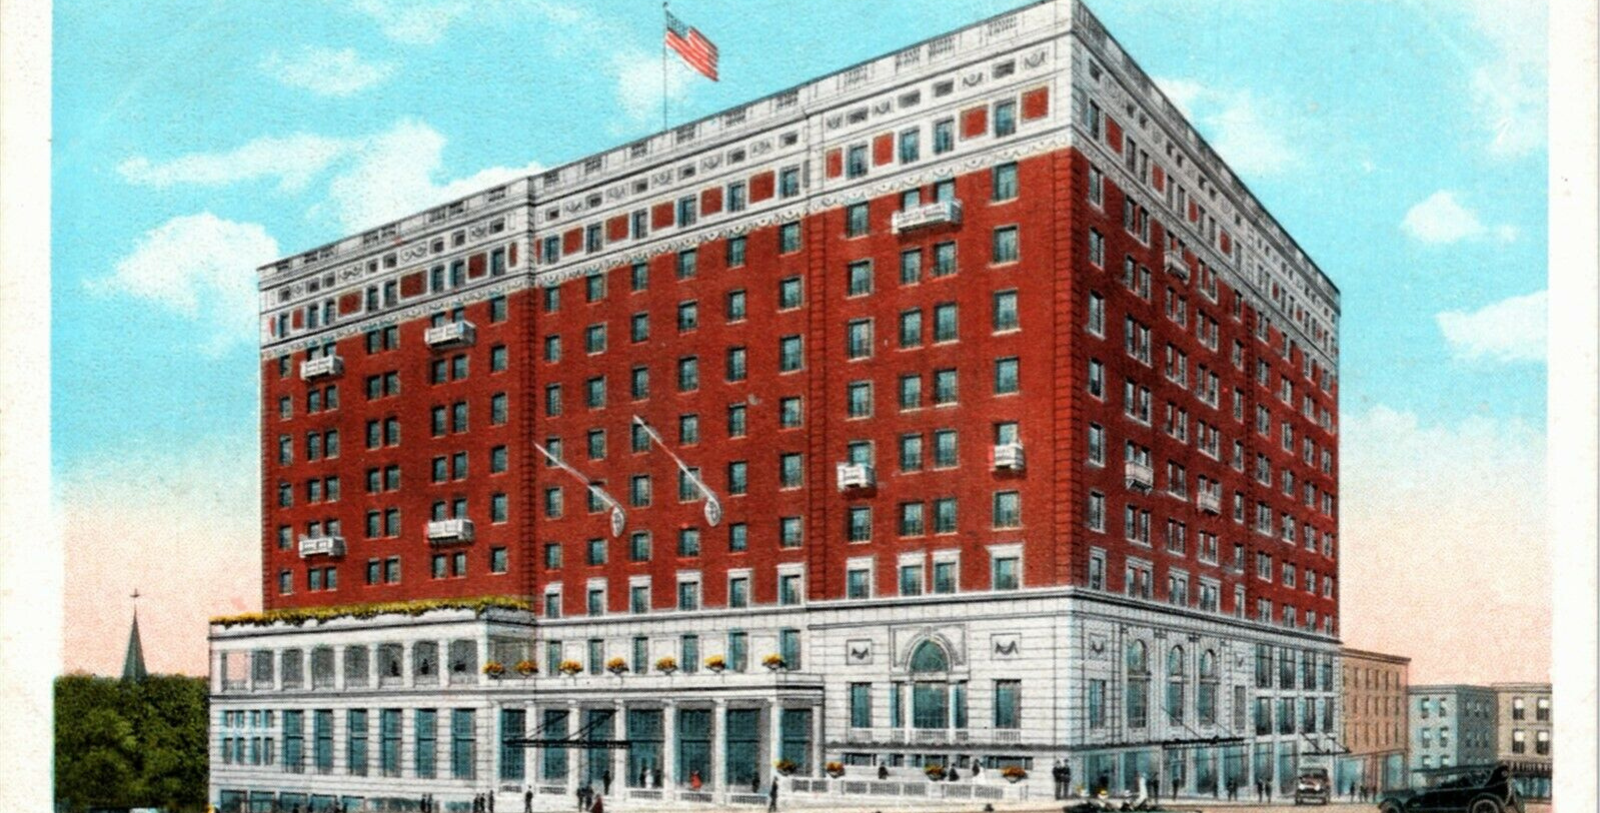 Discover the Roaring Twenties’ Beaux-Arts architecture of the George Washington Hotel.